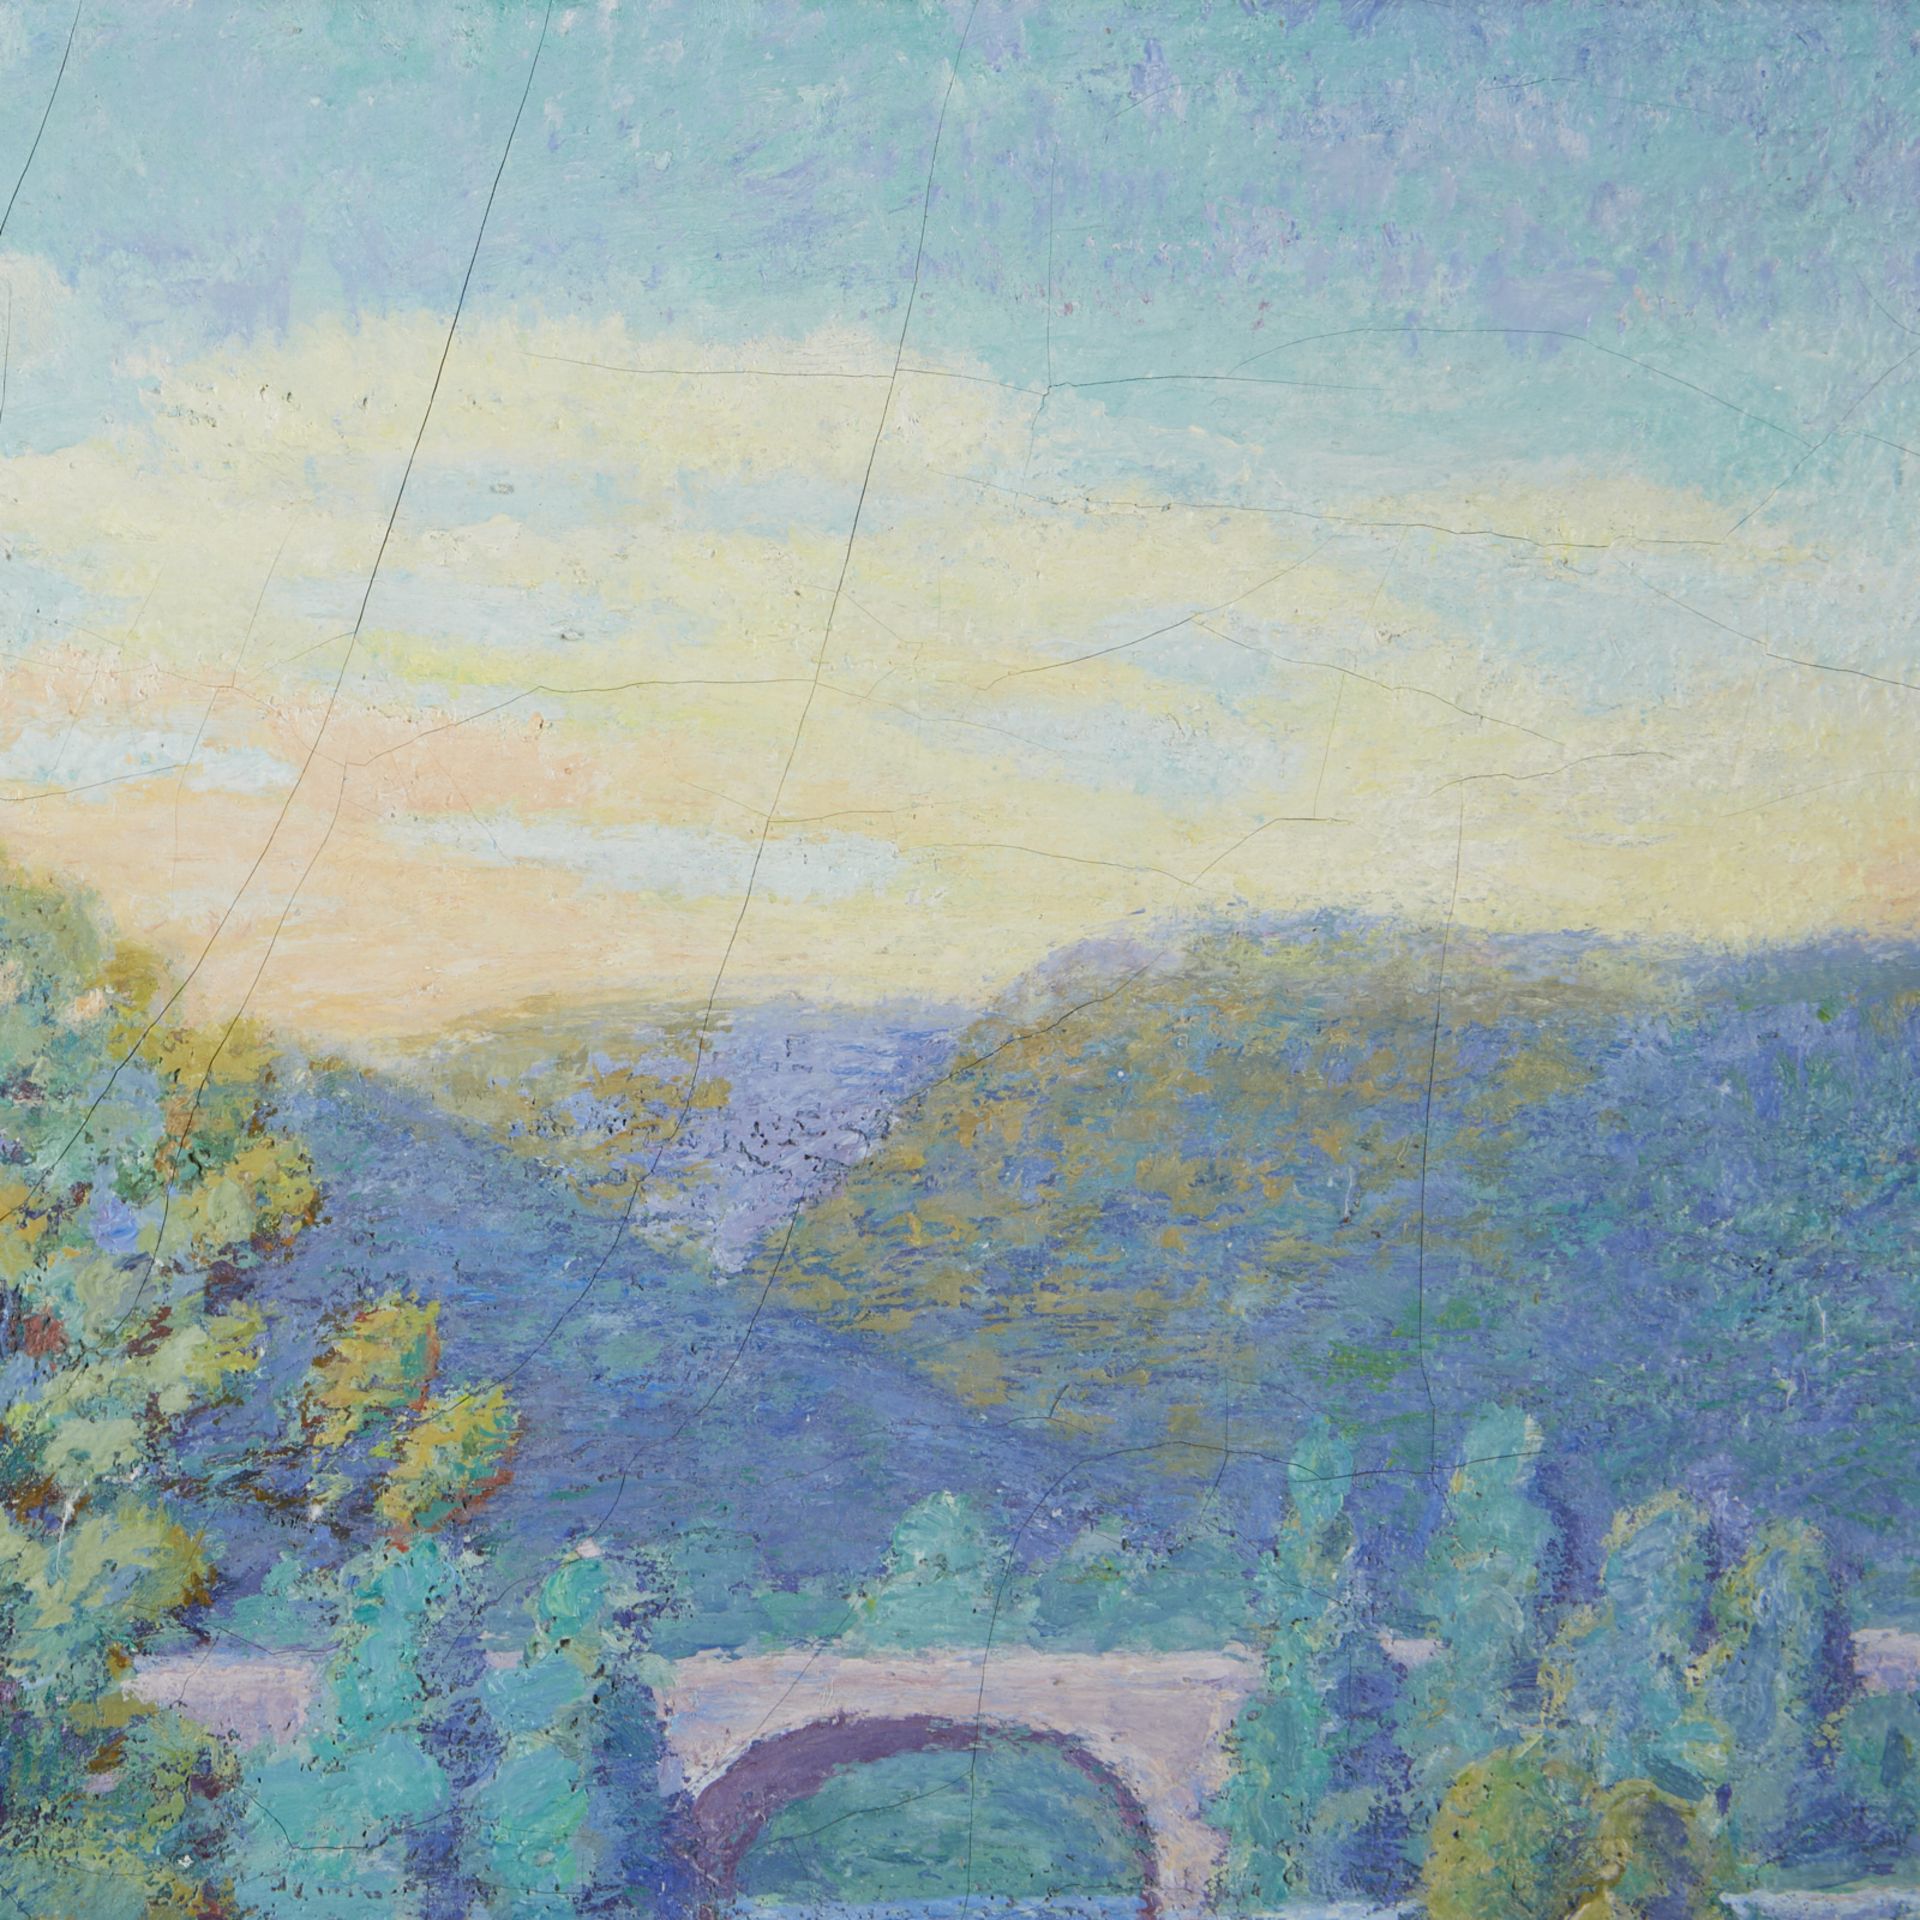 Mildred Poissant "Sundown on the River" Painting - Image 4 of 7